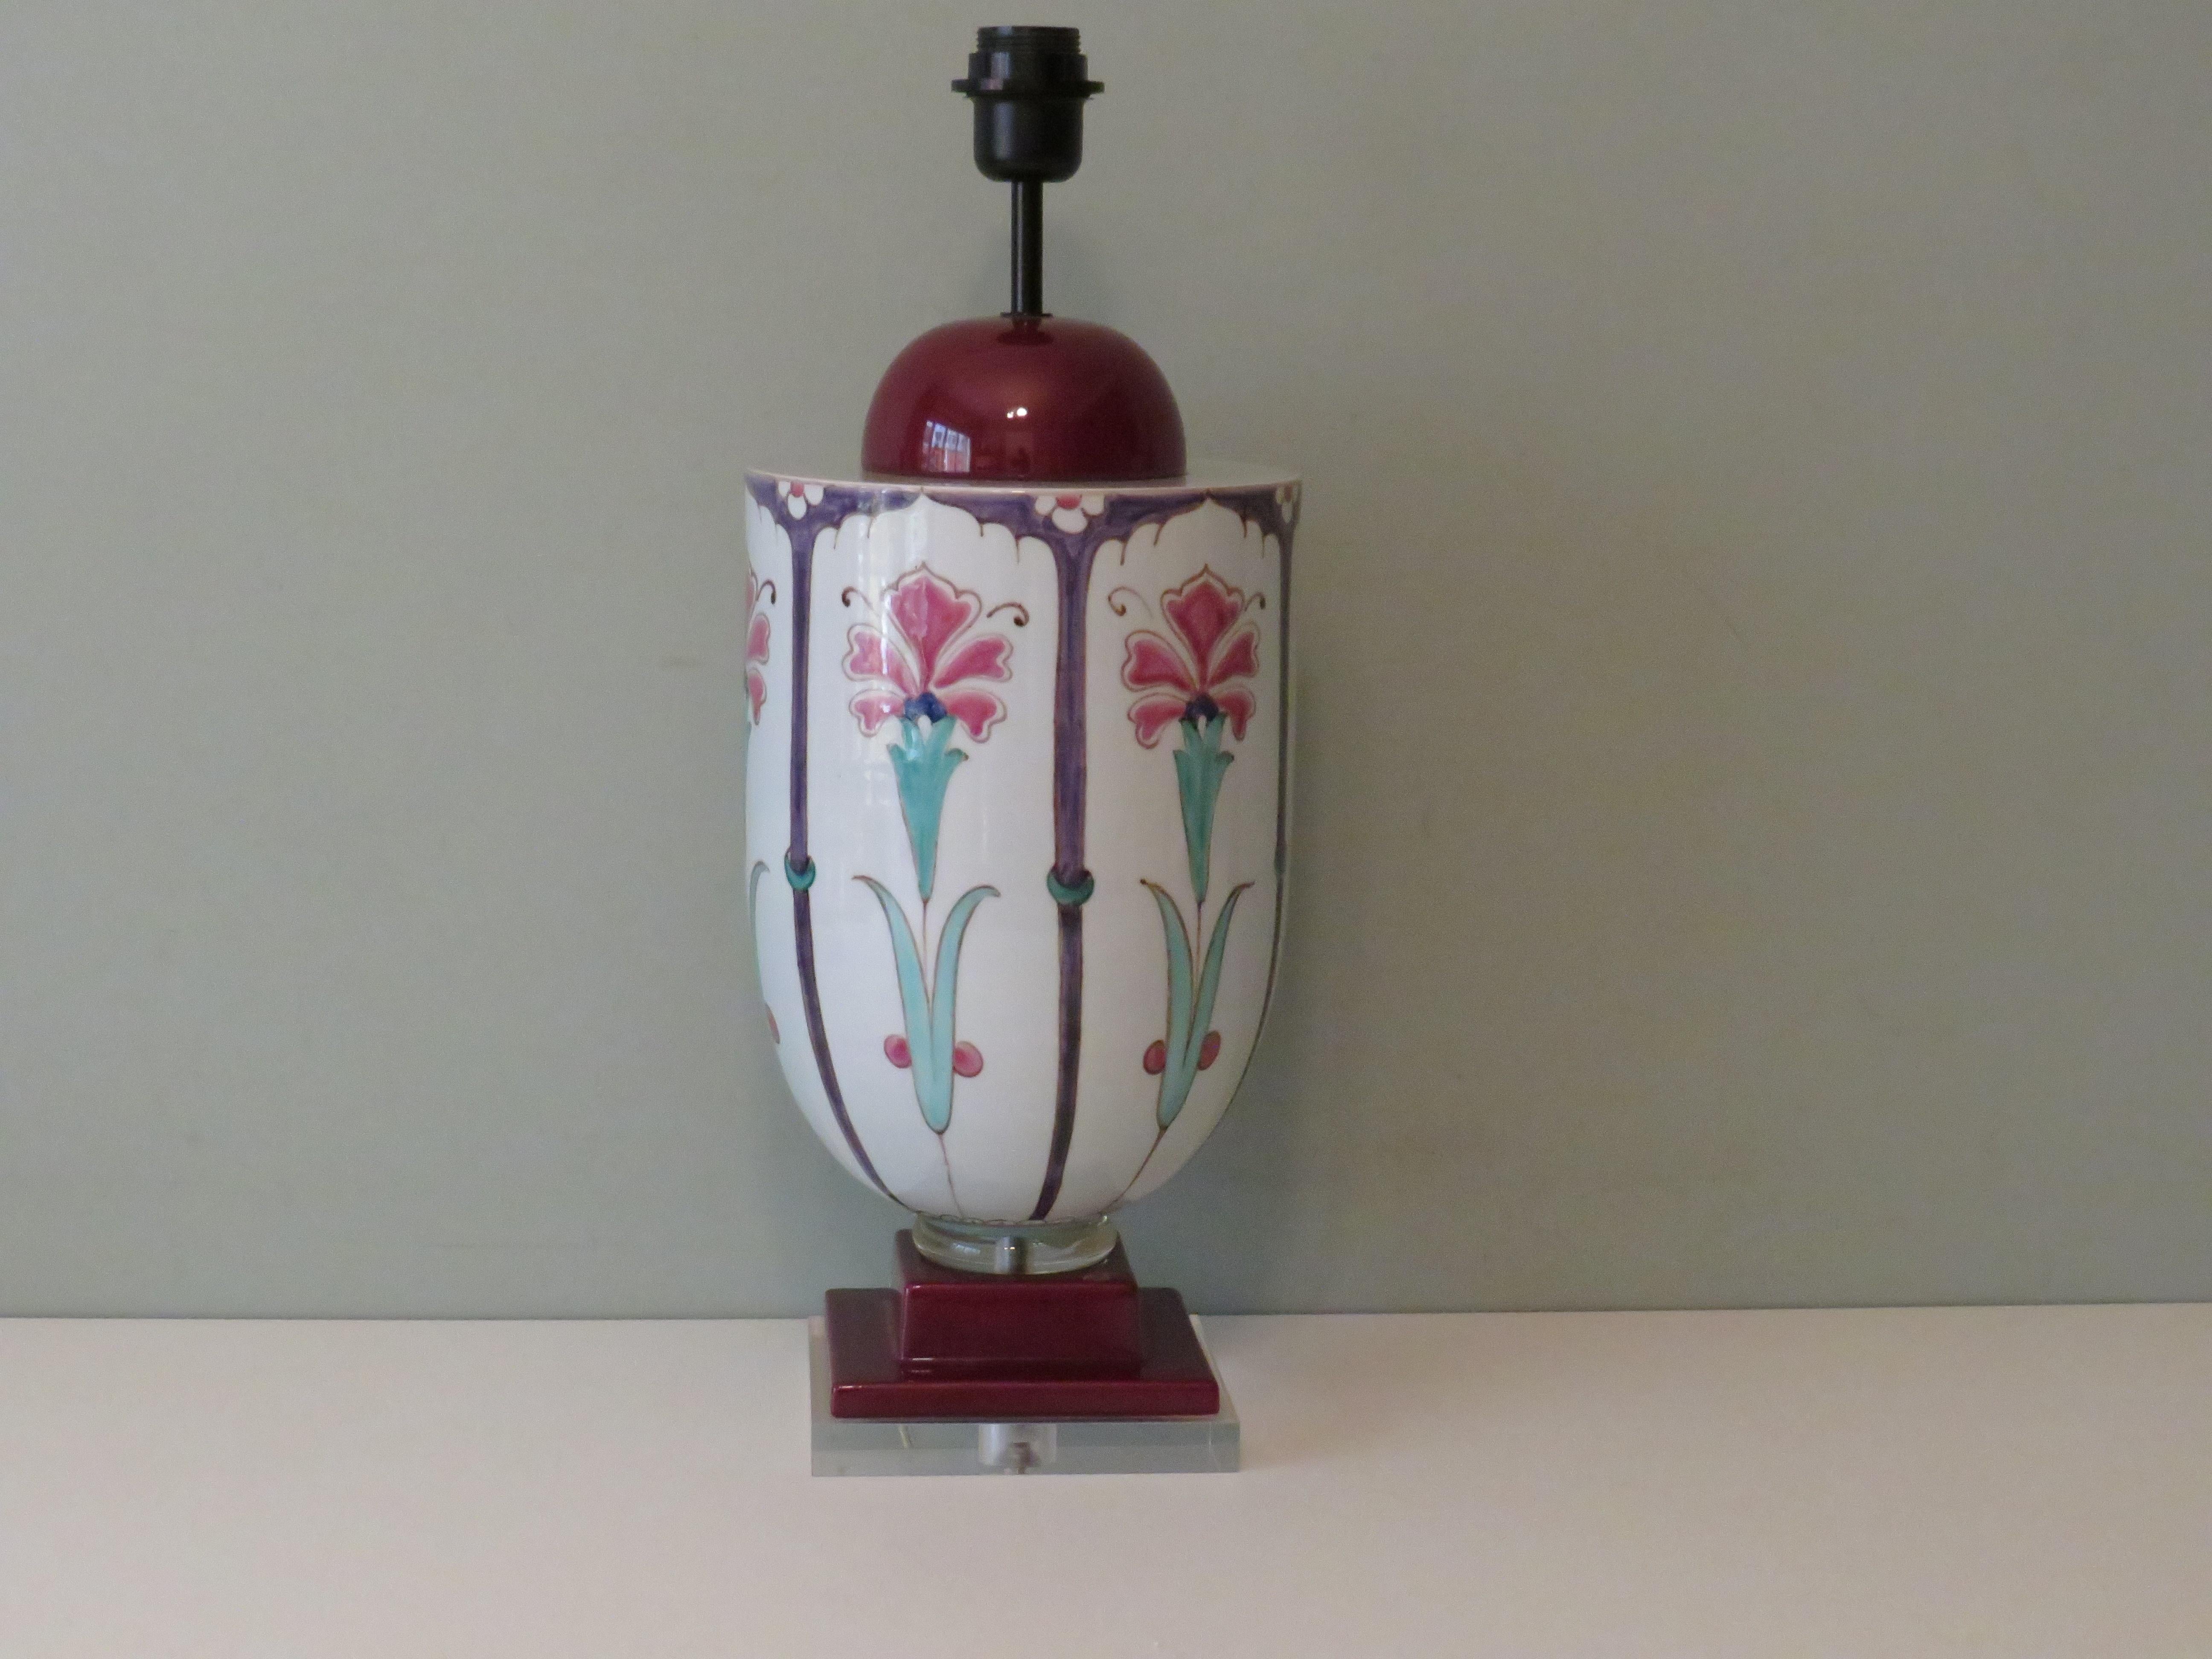 The lamp base with mainly burgundy and white glaze has a hand-painted drawing inspired by the Art Nouveau period in beautiful green and pink tones. The ceramic lamp base is mounted on a square plexi base and has a Bakelite socket with E 27